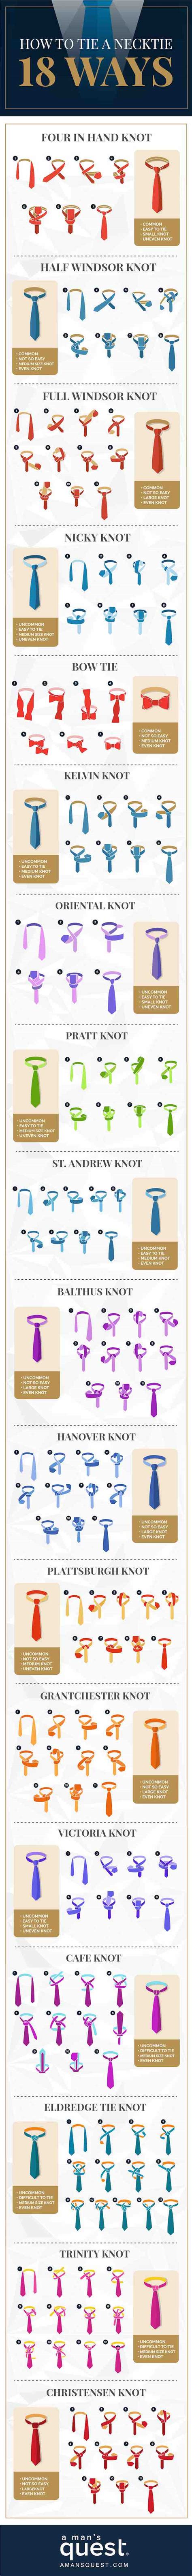 How To Tie A Tie 18 Different Ways To Look Dapper